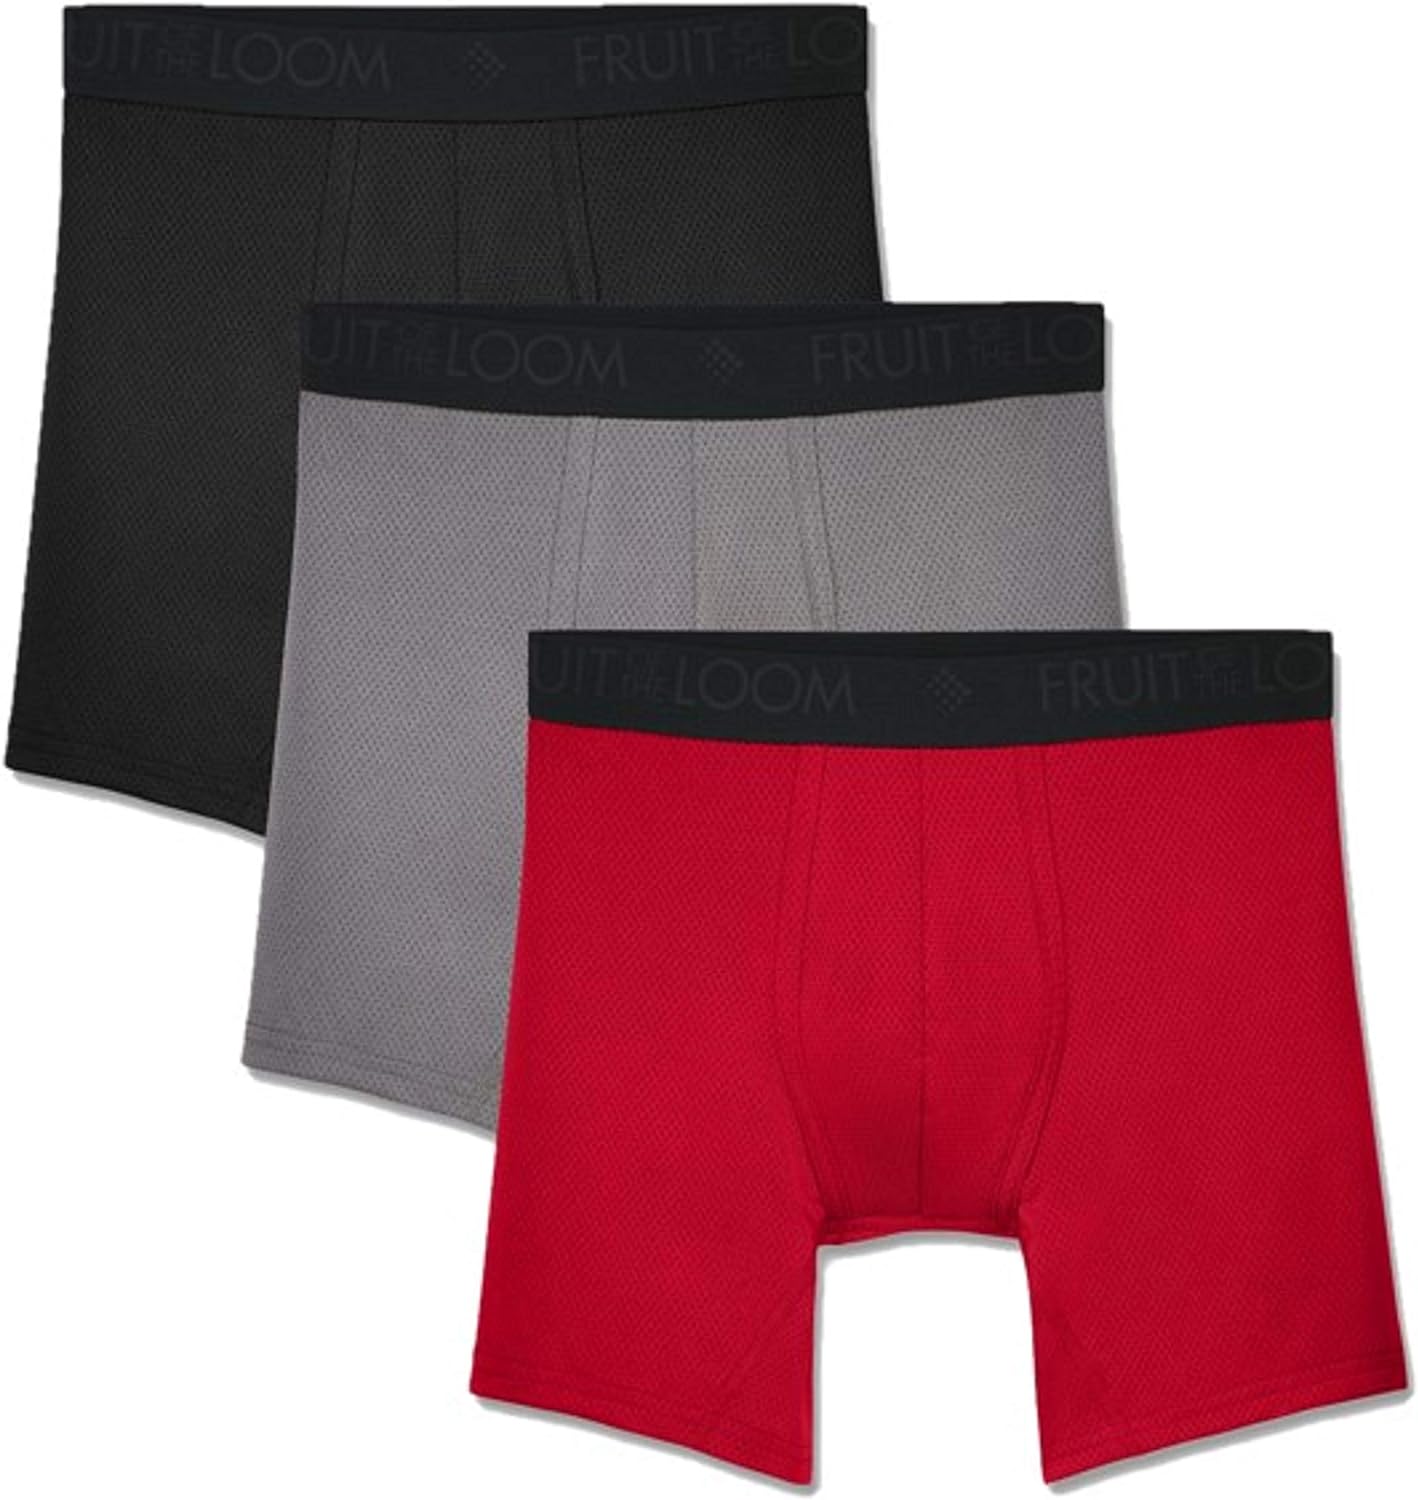 Fruit of the Loom Men' Breathable Boxer Briefs, Moisture Wicking Underwear, Assorted Color Multipacks